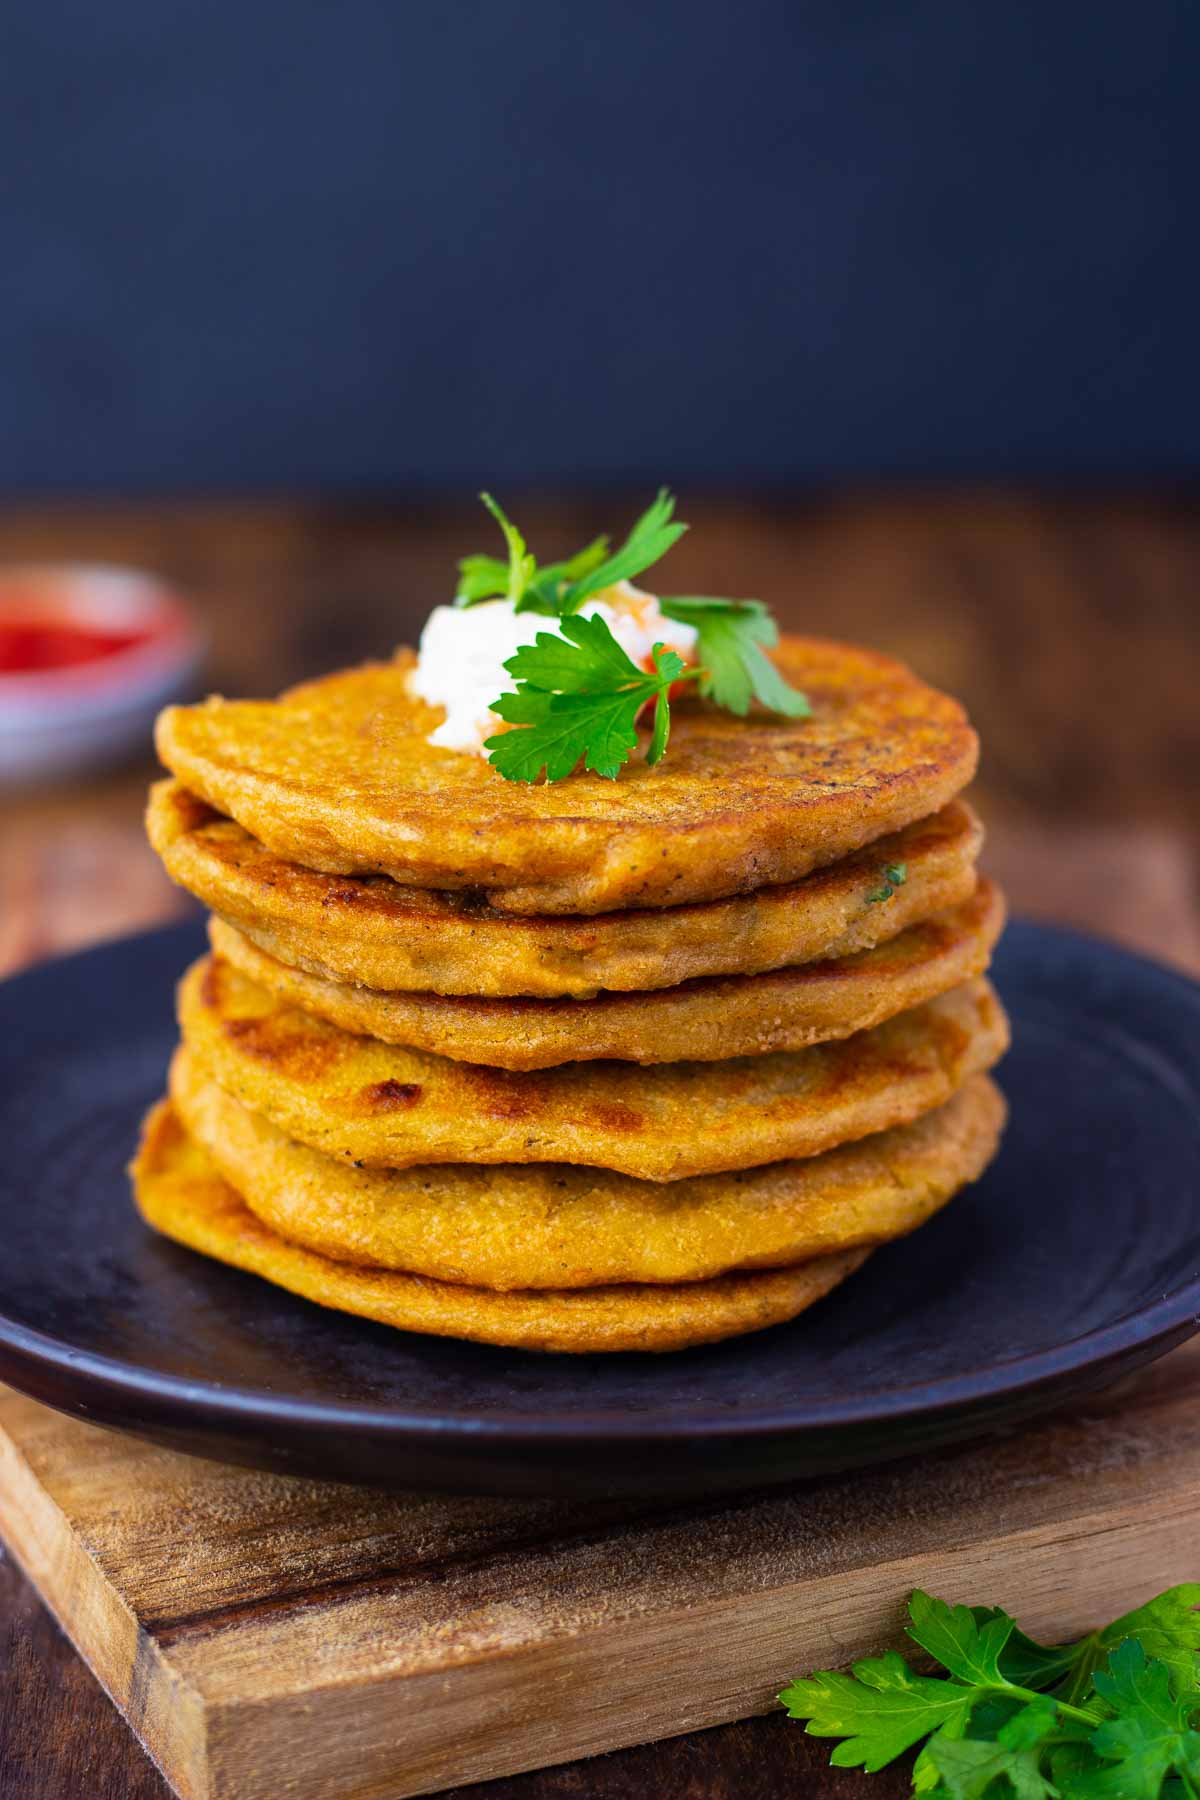 Six lentil pancakes stacked on a blue plate. The pancakes are garnished with a butter butter and cilantro.